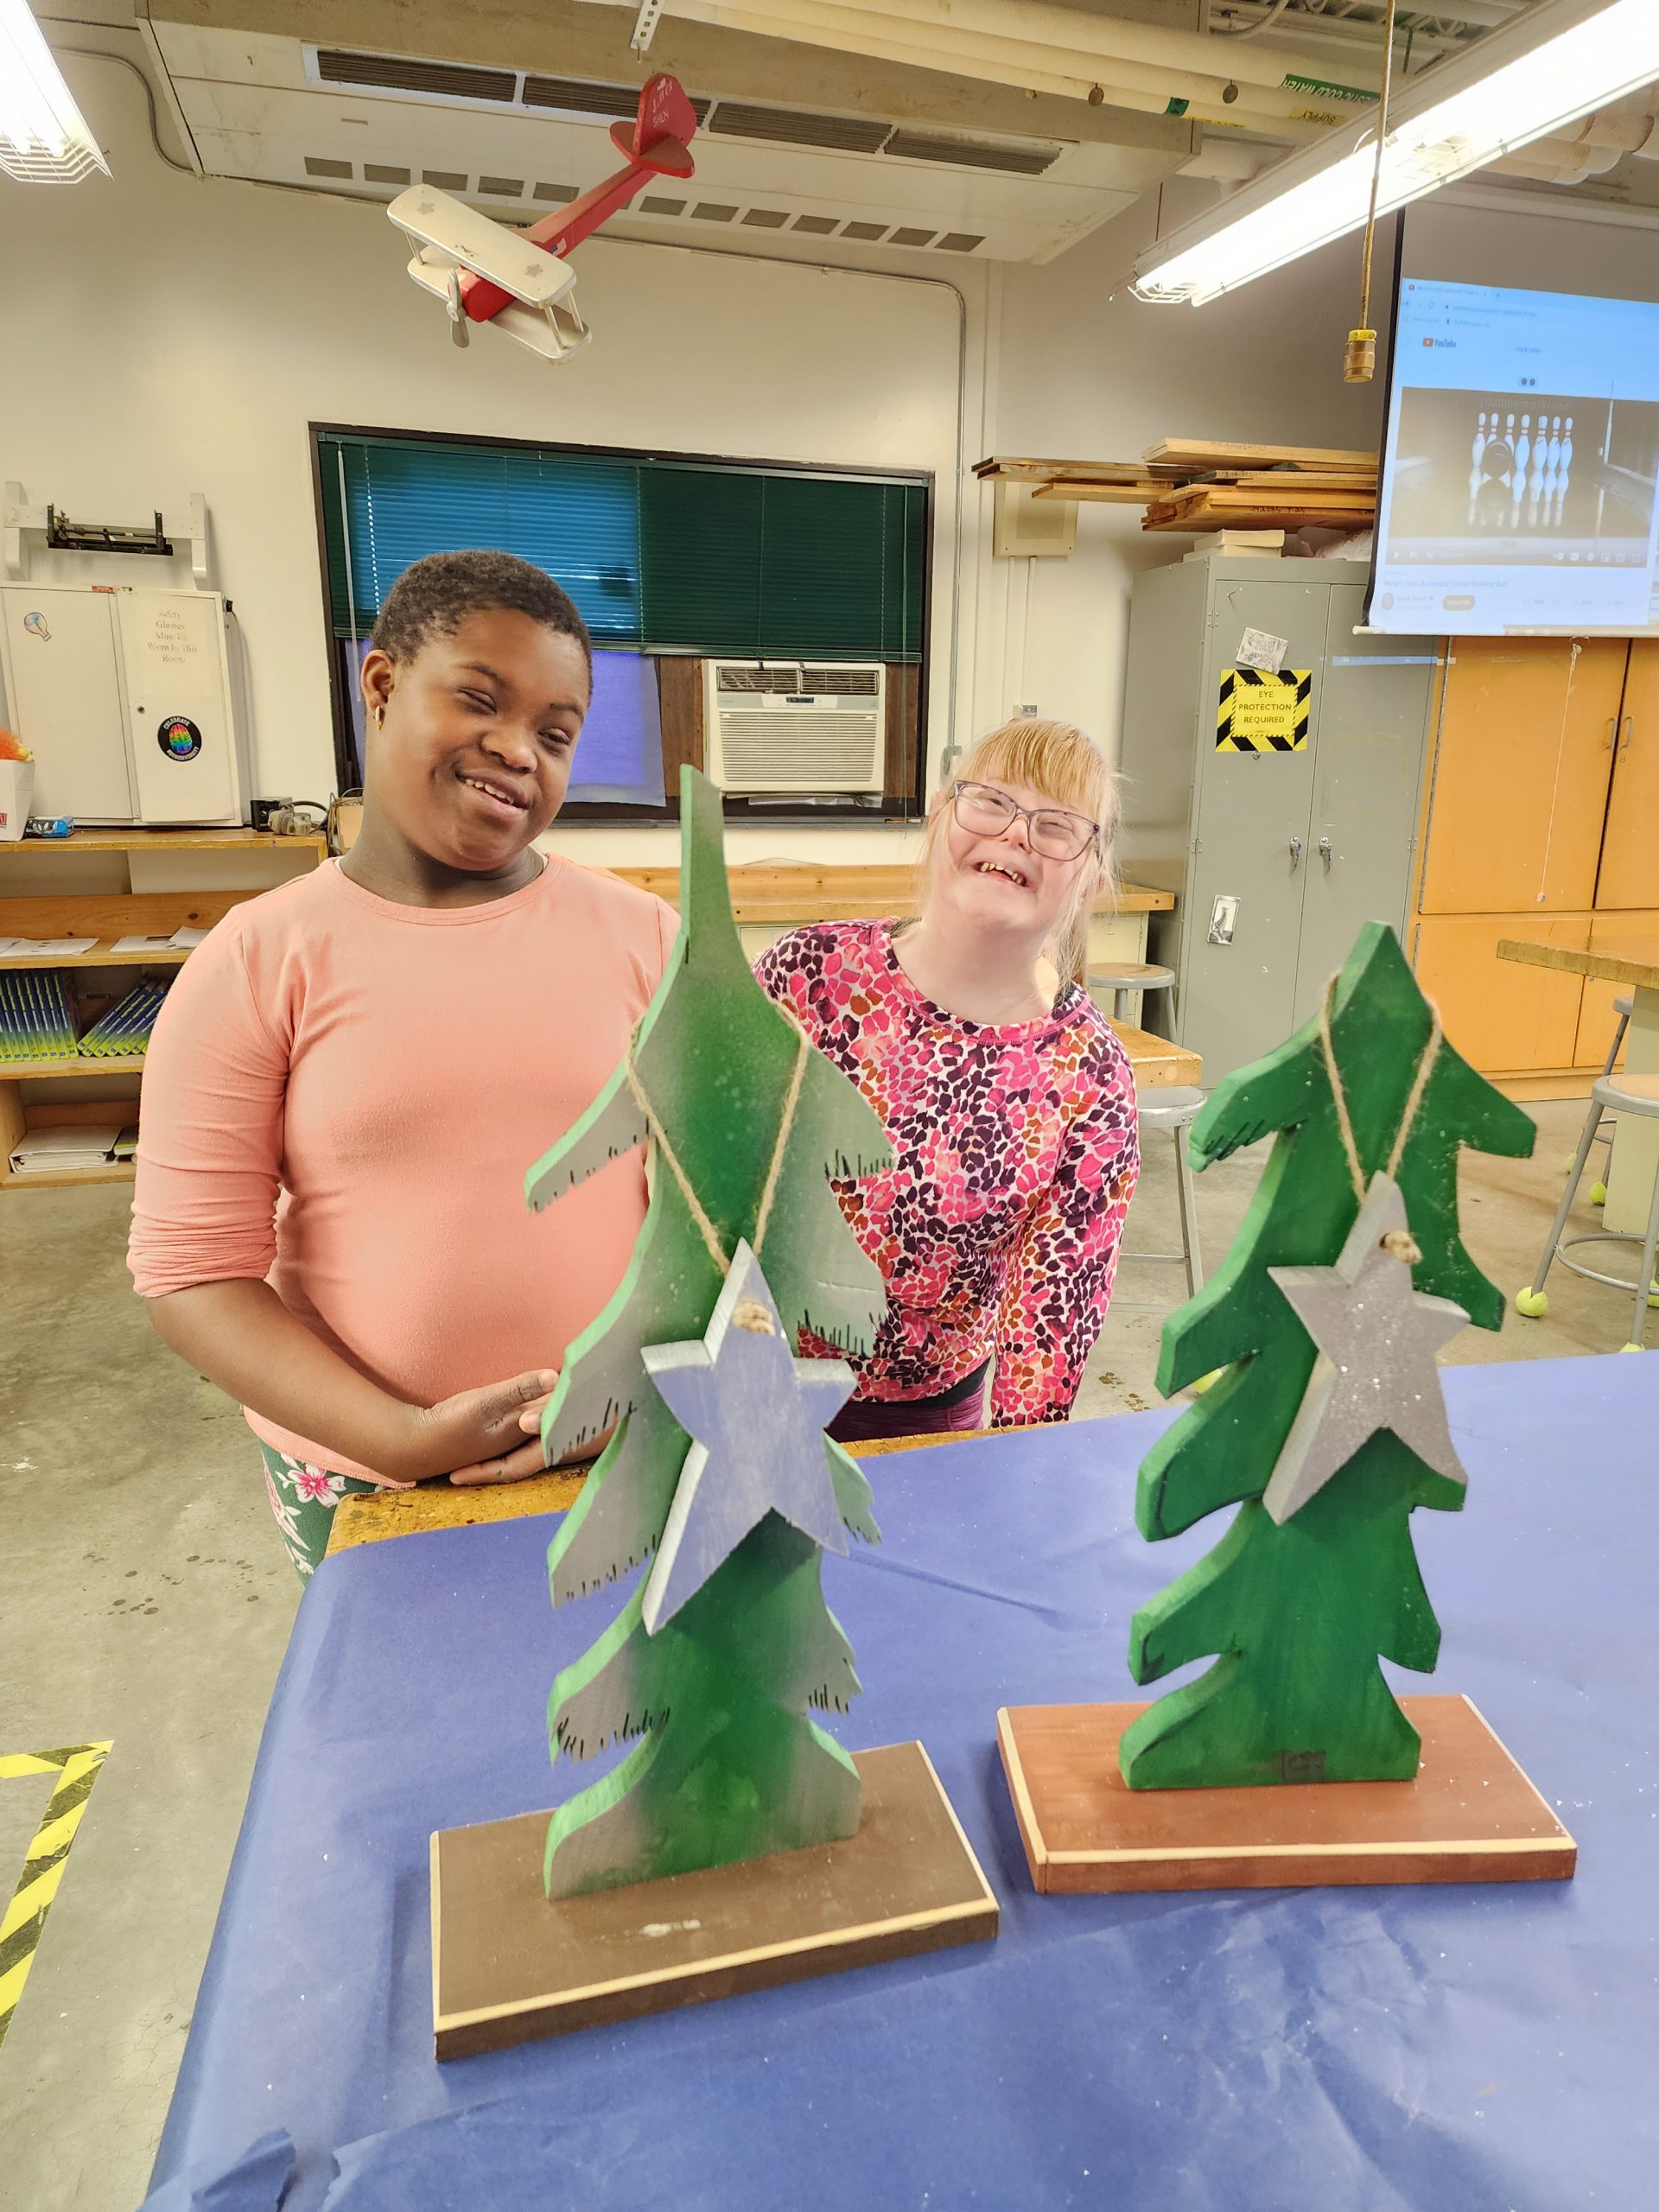 Mr. Symonds's ISD and FSD students ( Functional Skills Development and Individual Skills Development) made whimsical trees for the holiday. 